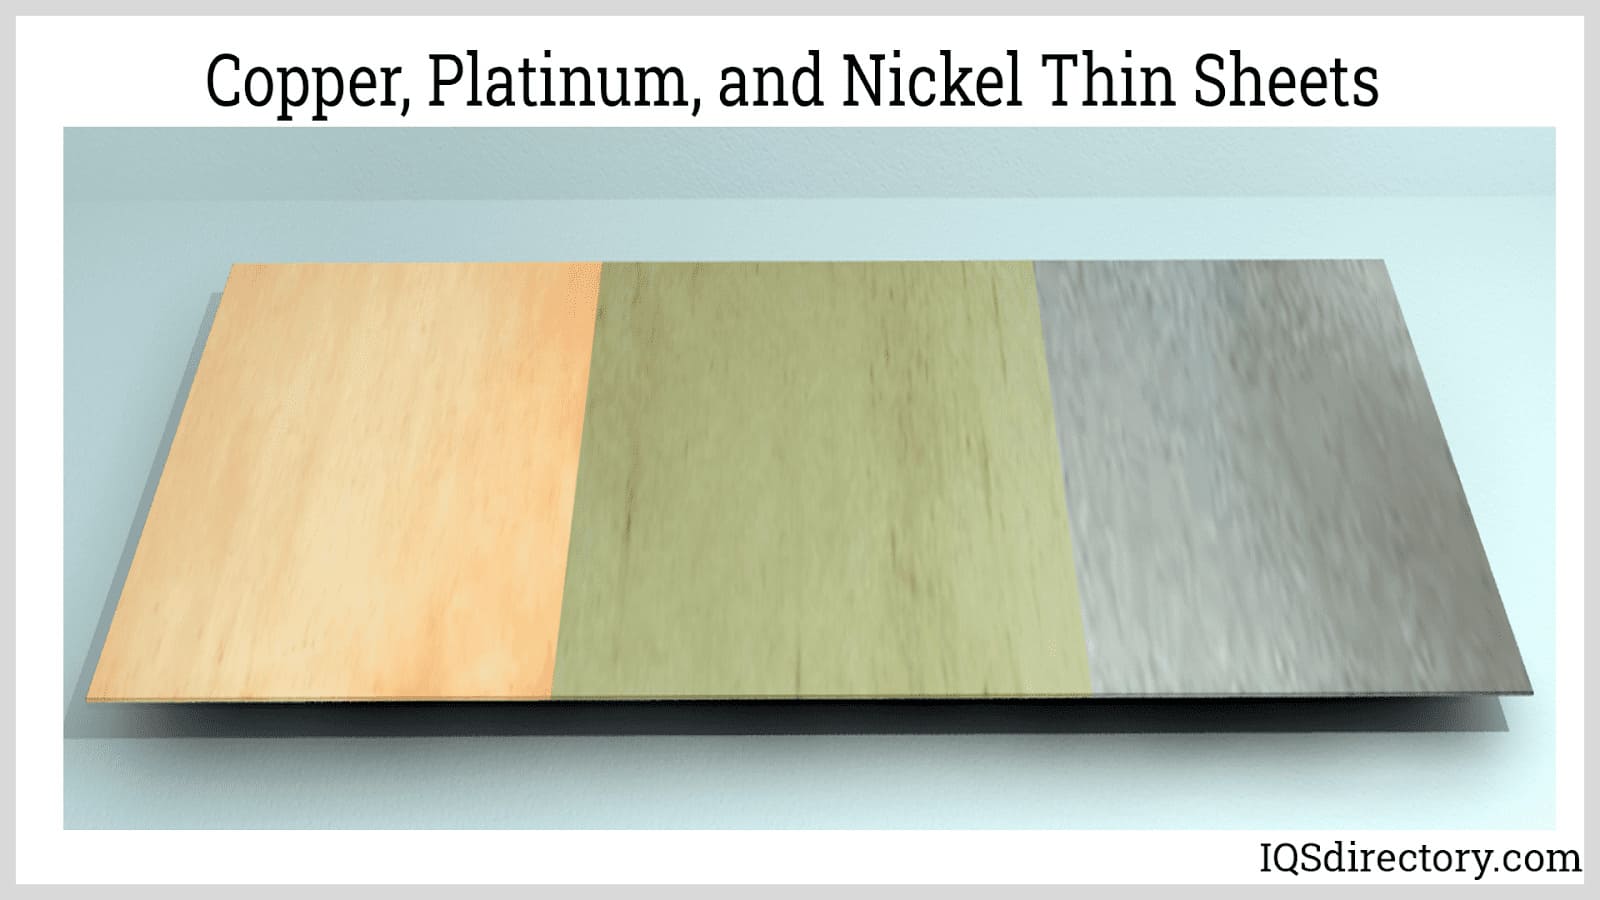 Copper, Platinum, and Nickel Thin Sheets